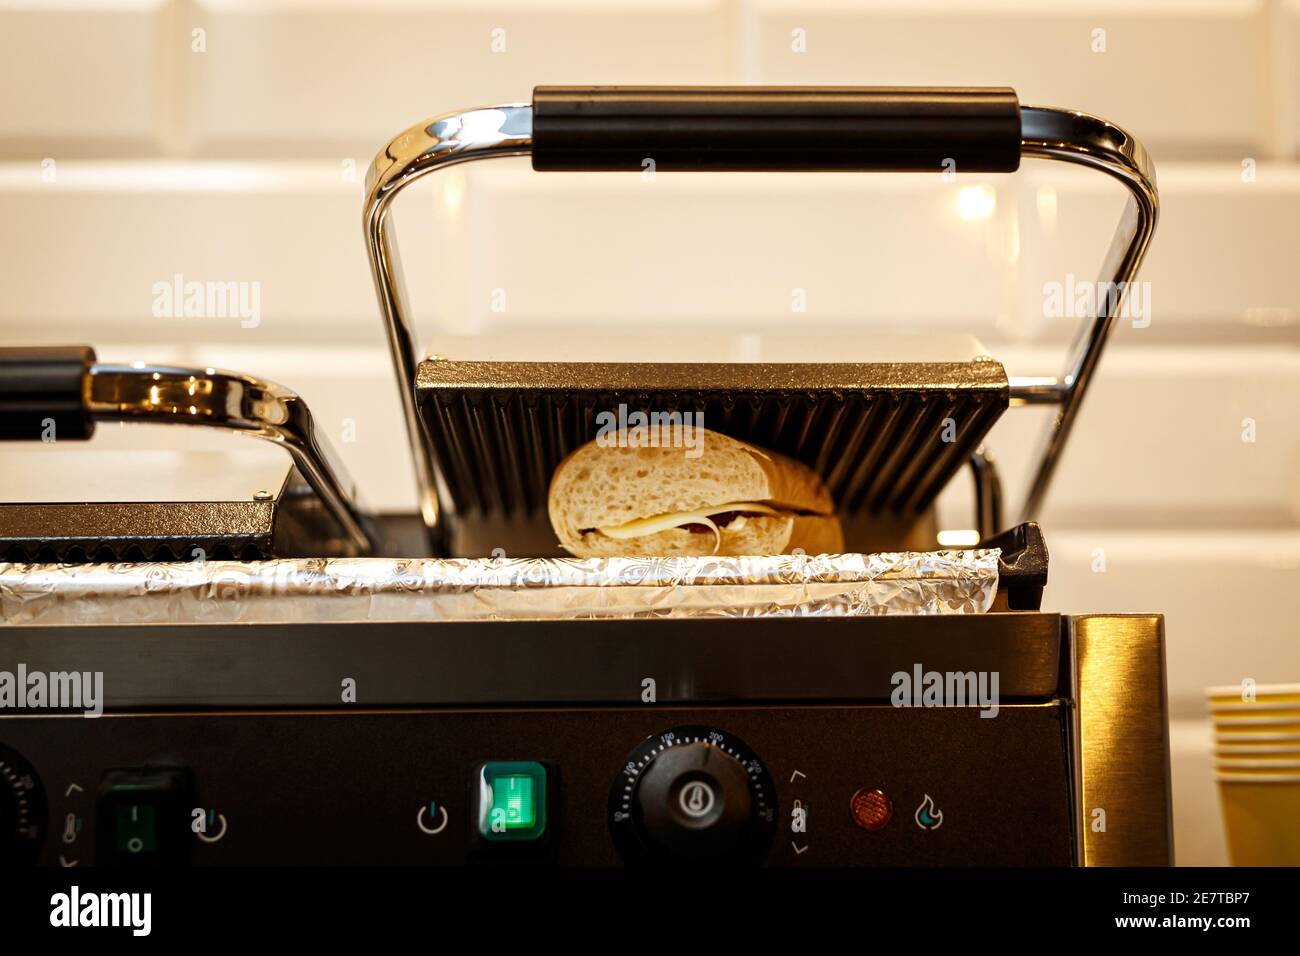 https://c8.alamy.com/comp/2E7TBP7/sandwich-toaster-with-toast-and-ingredients-2E7TBP7.jpg